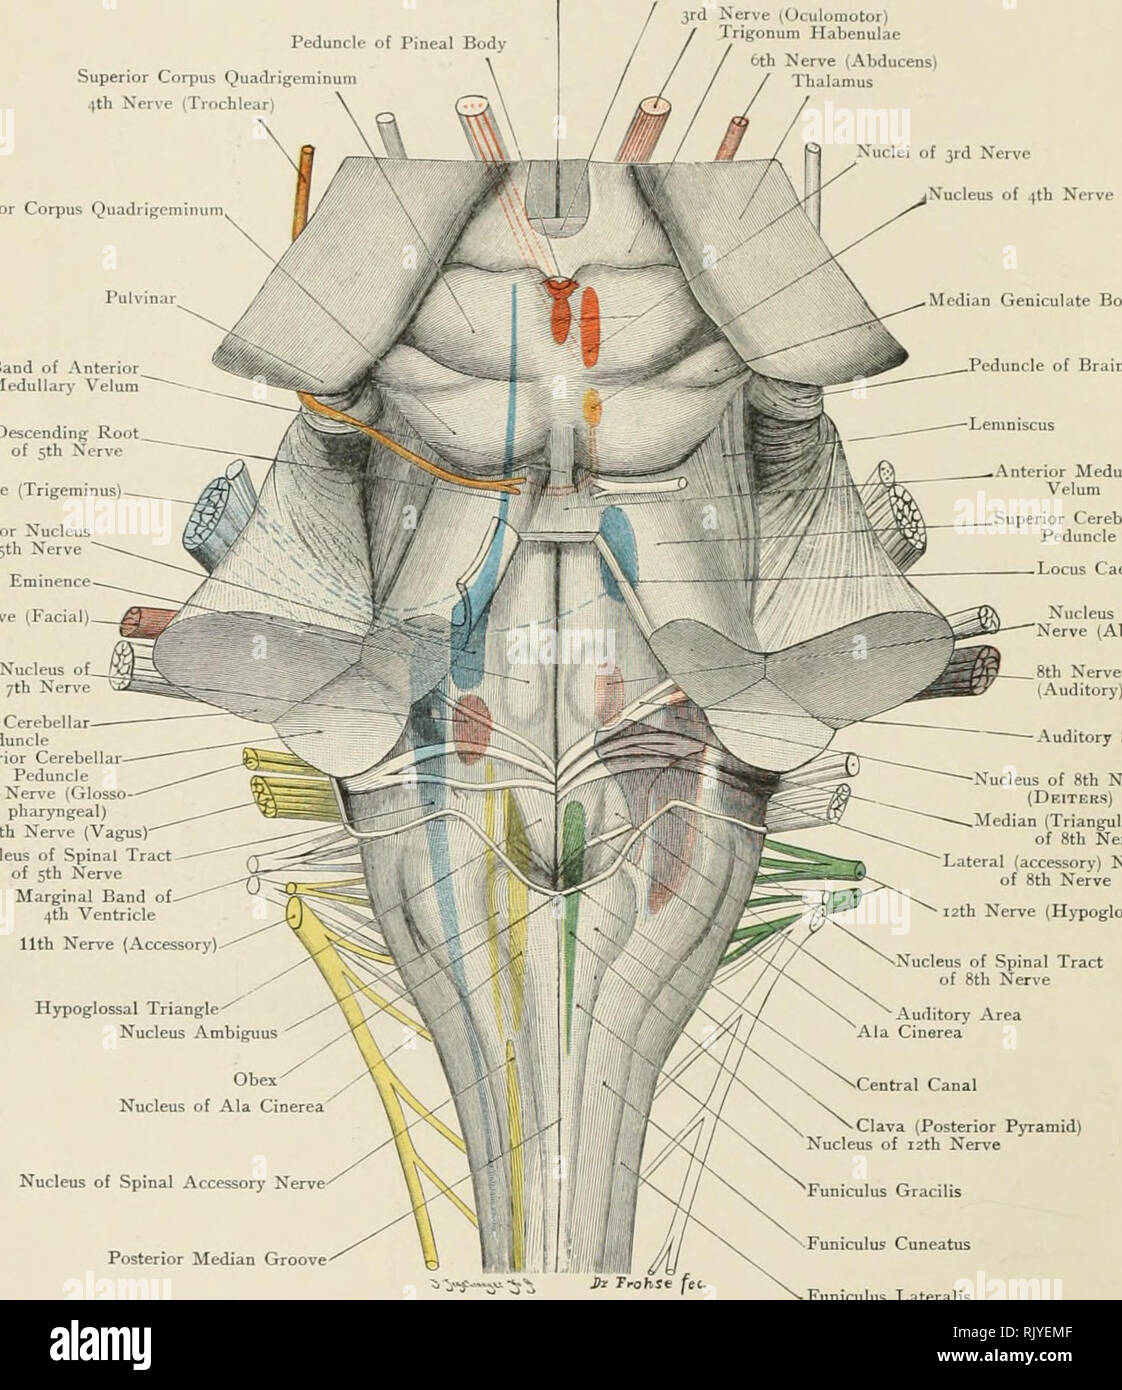 . Atlas of applied (topographical) human anatomy for students and practitioners. Anatomy. ^rd Ventricle Posterior Commissure Peduncle of Pineal Body Superior Corpus Quadrigeminum 4th Nerve {Trochlear / 3rd Nerve tOculomotor) / ' Trigonum Habenulae 6th Nerve (Abducens) Thalamus Inferior Corpus Quadrigcminu Pulvinji Band of Anterior. Medullary Velum Descending Root. of 5th S'erve nXudei of 3rd Nerve N'ucleus of 4th Nerve 5th Nerve (Trigeminus) Motor Nucleus of 5th Nerve Facial Eminence 7th Nerve (Facia Modian Geniculate Body Peduncle of Brain Anterior Medullary Velum Superior Cerebellar Peduncle Stock Photo